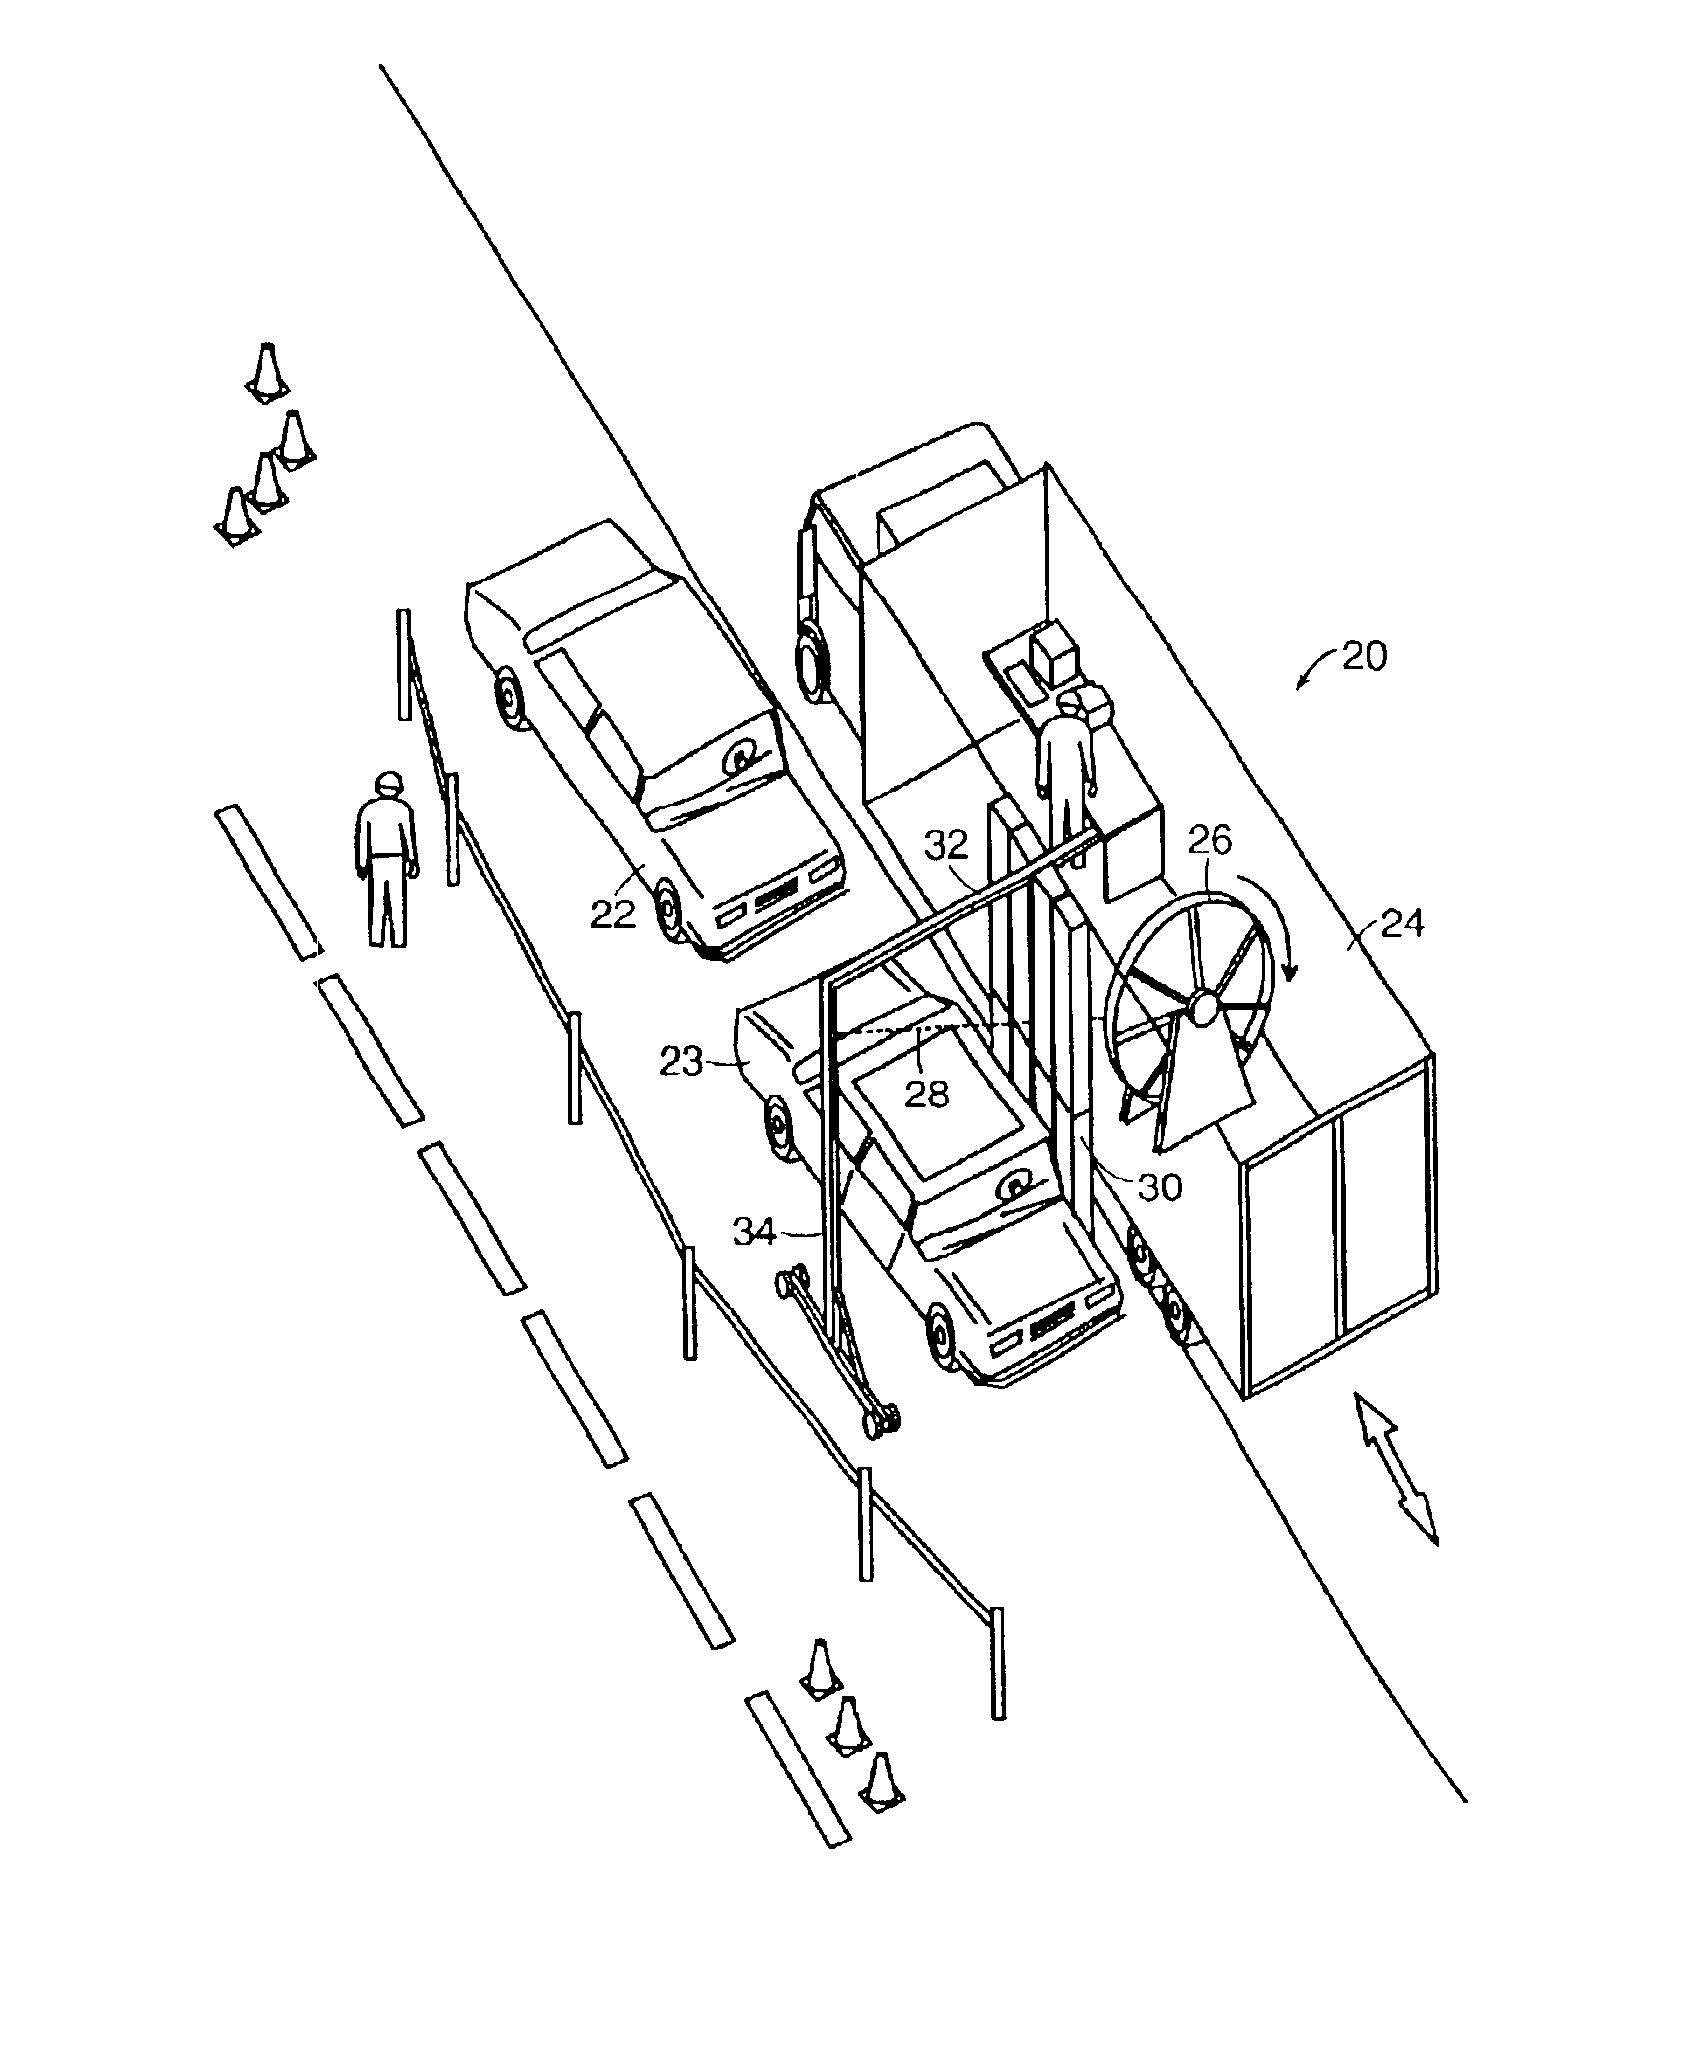 Mobile x-ray inspection system for large objects